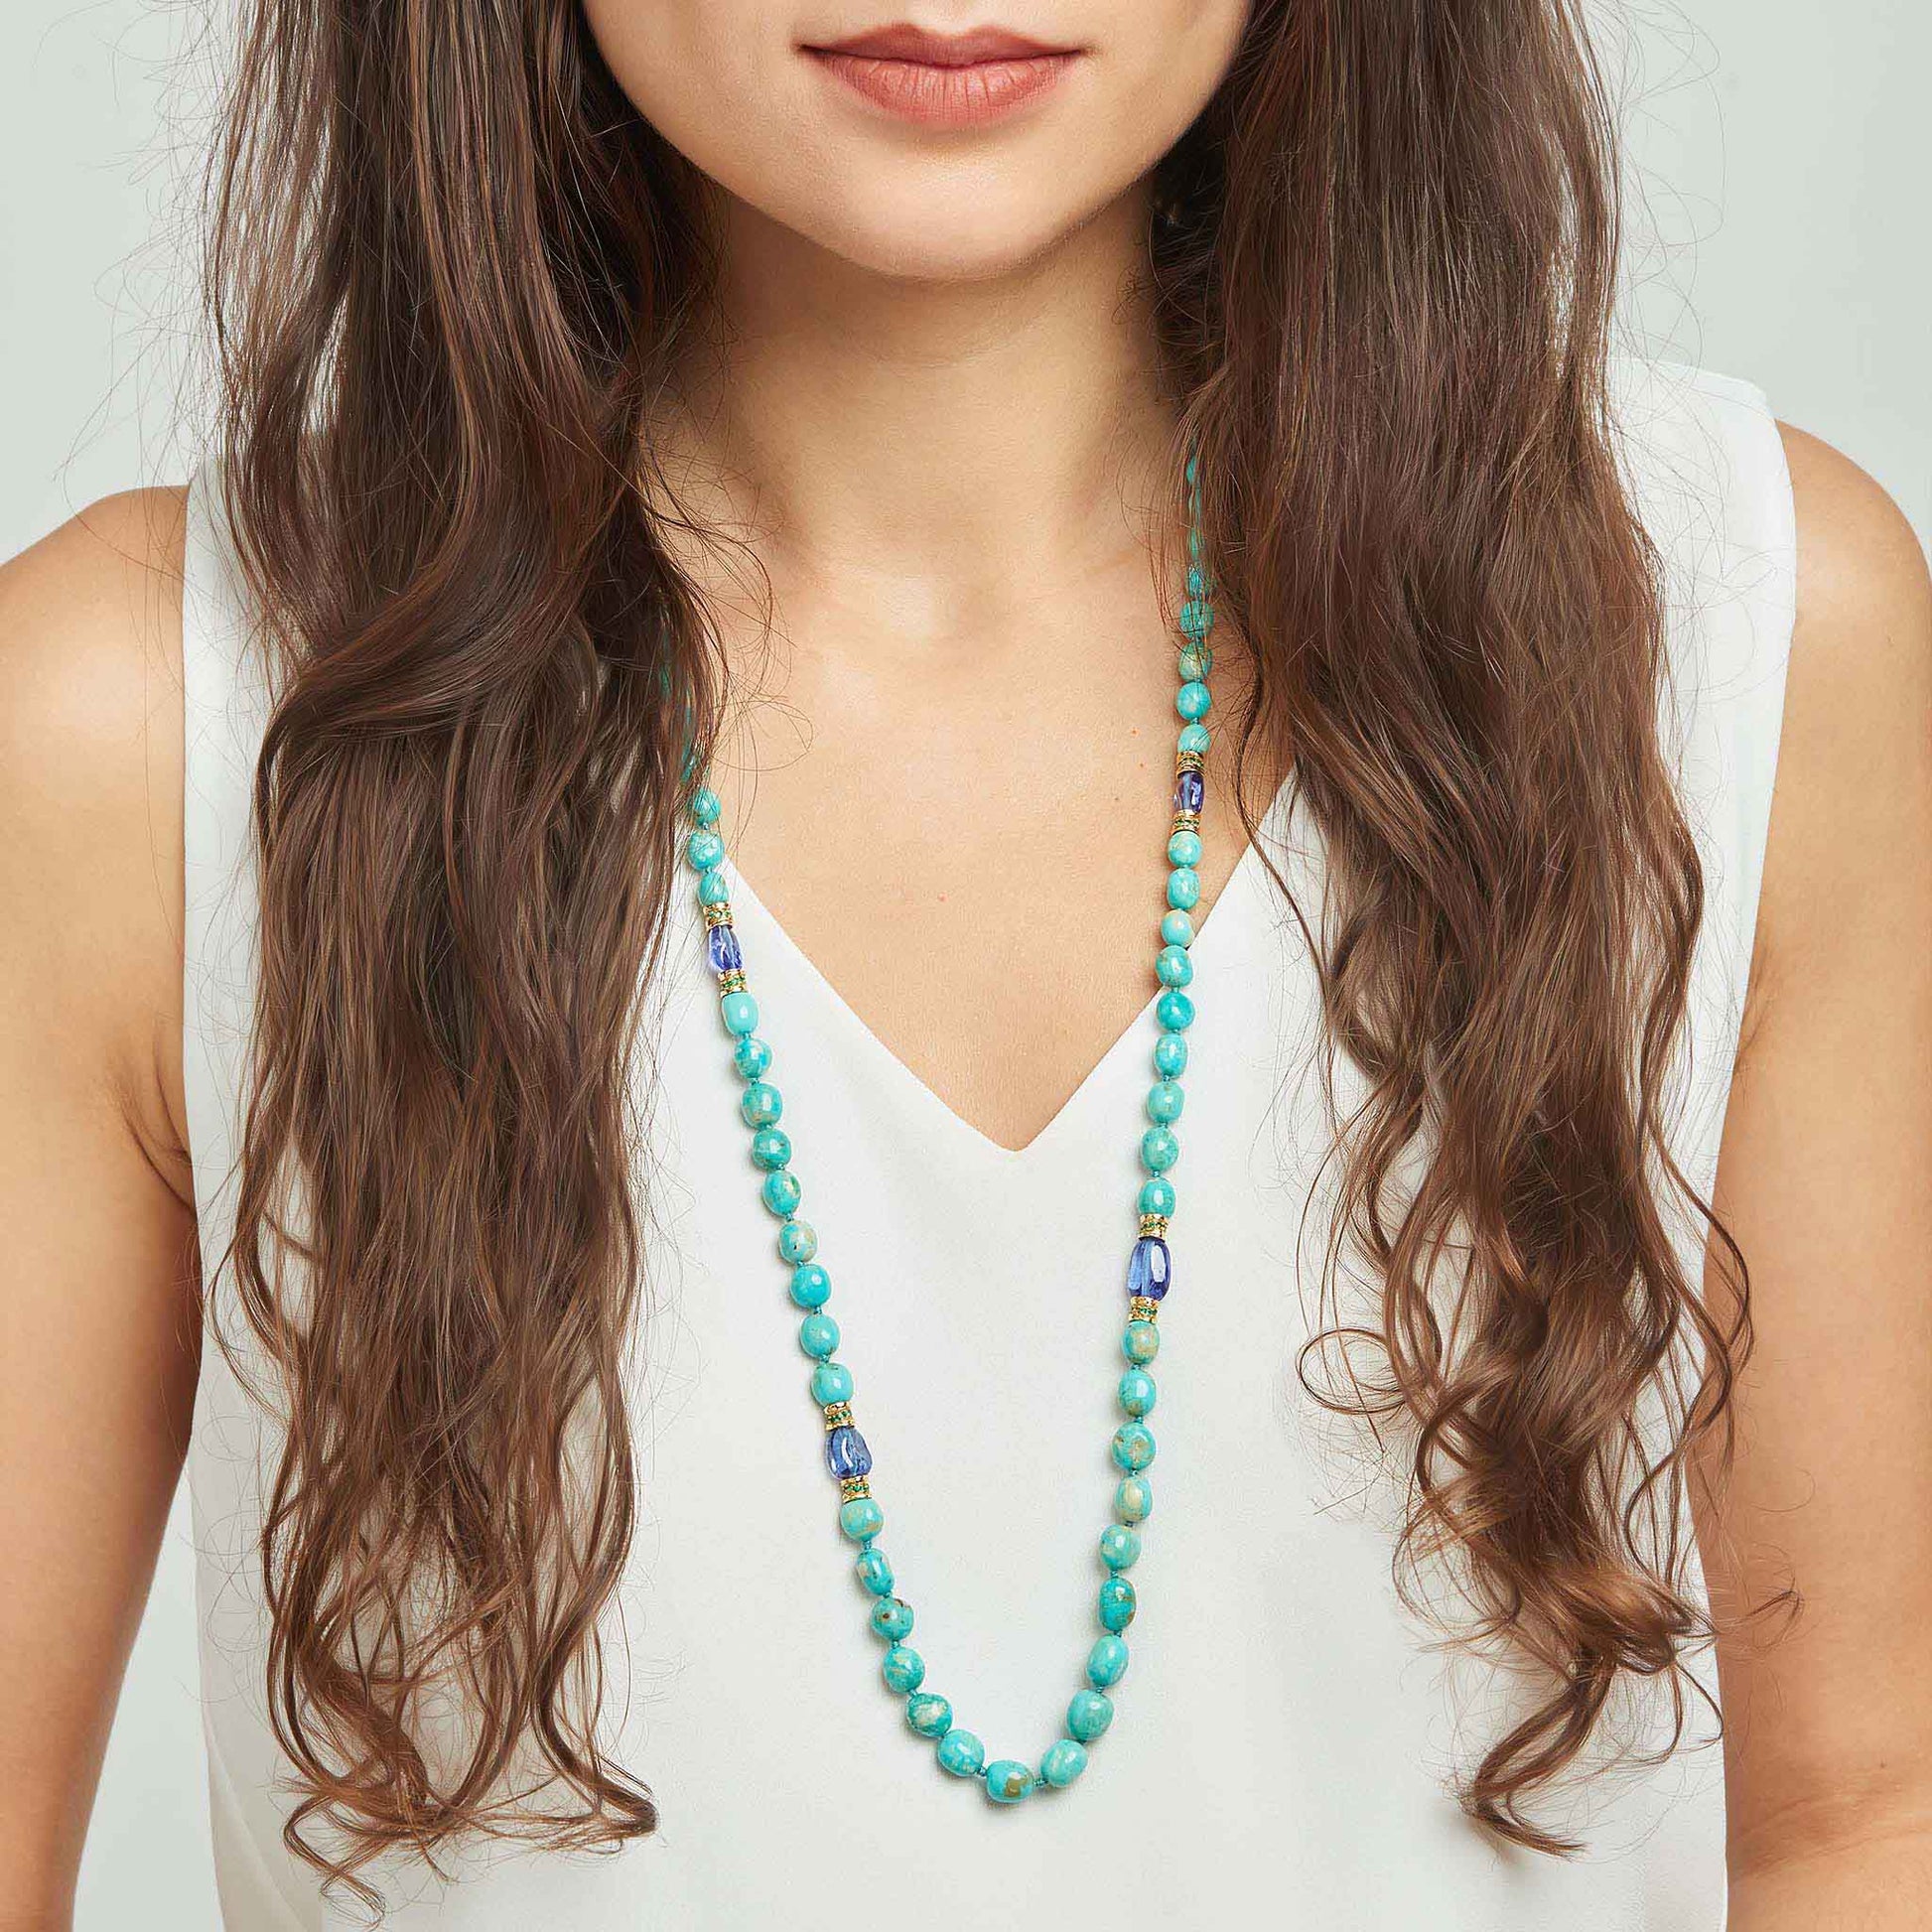 Mimi So Wonderland Turquoise and Tanzanite Bead Necklace On-body